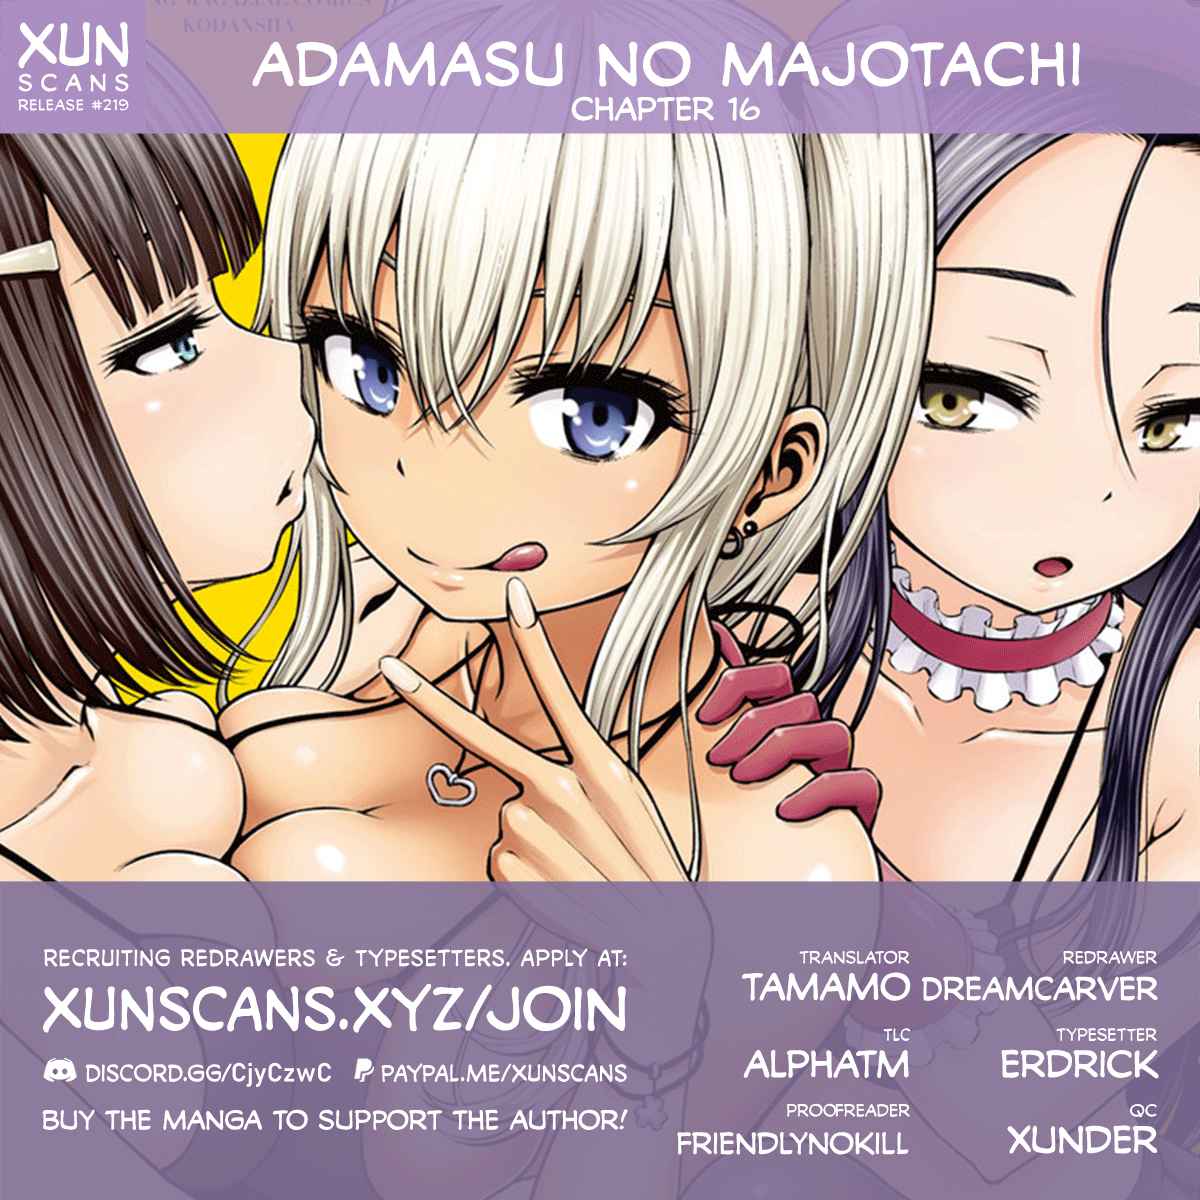 Adamasu no Majotachi Ch. 16 The little science girl's proof of concept